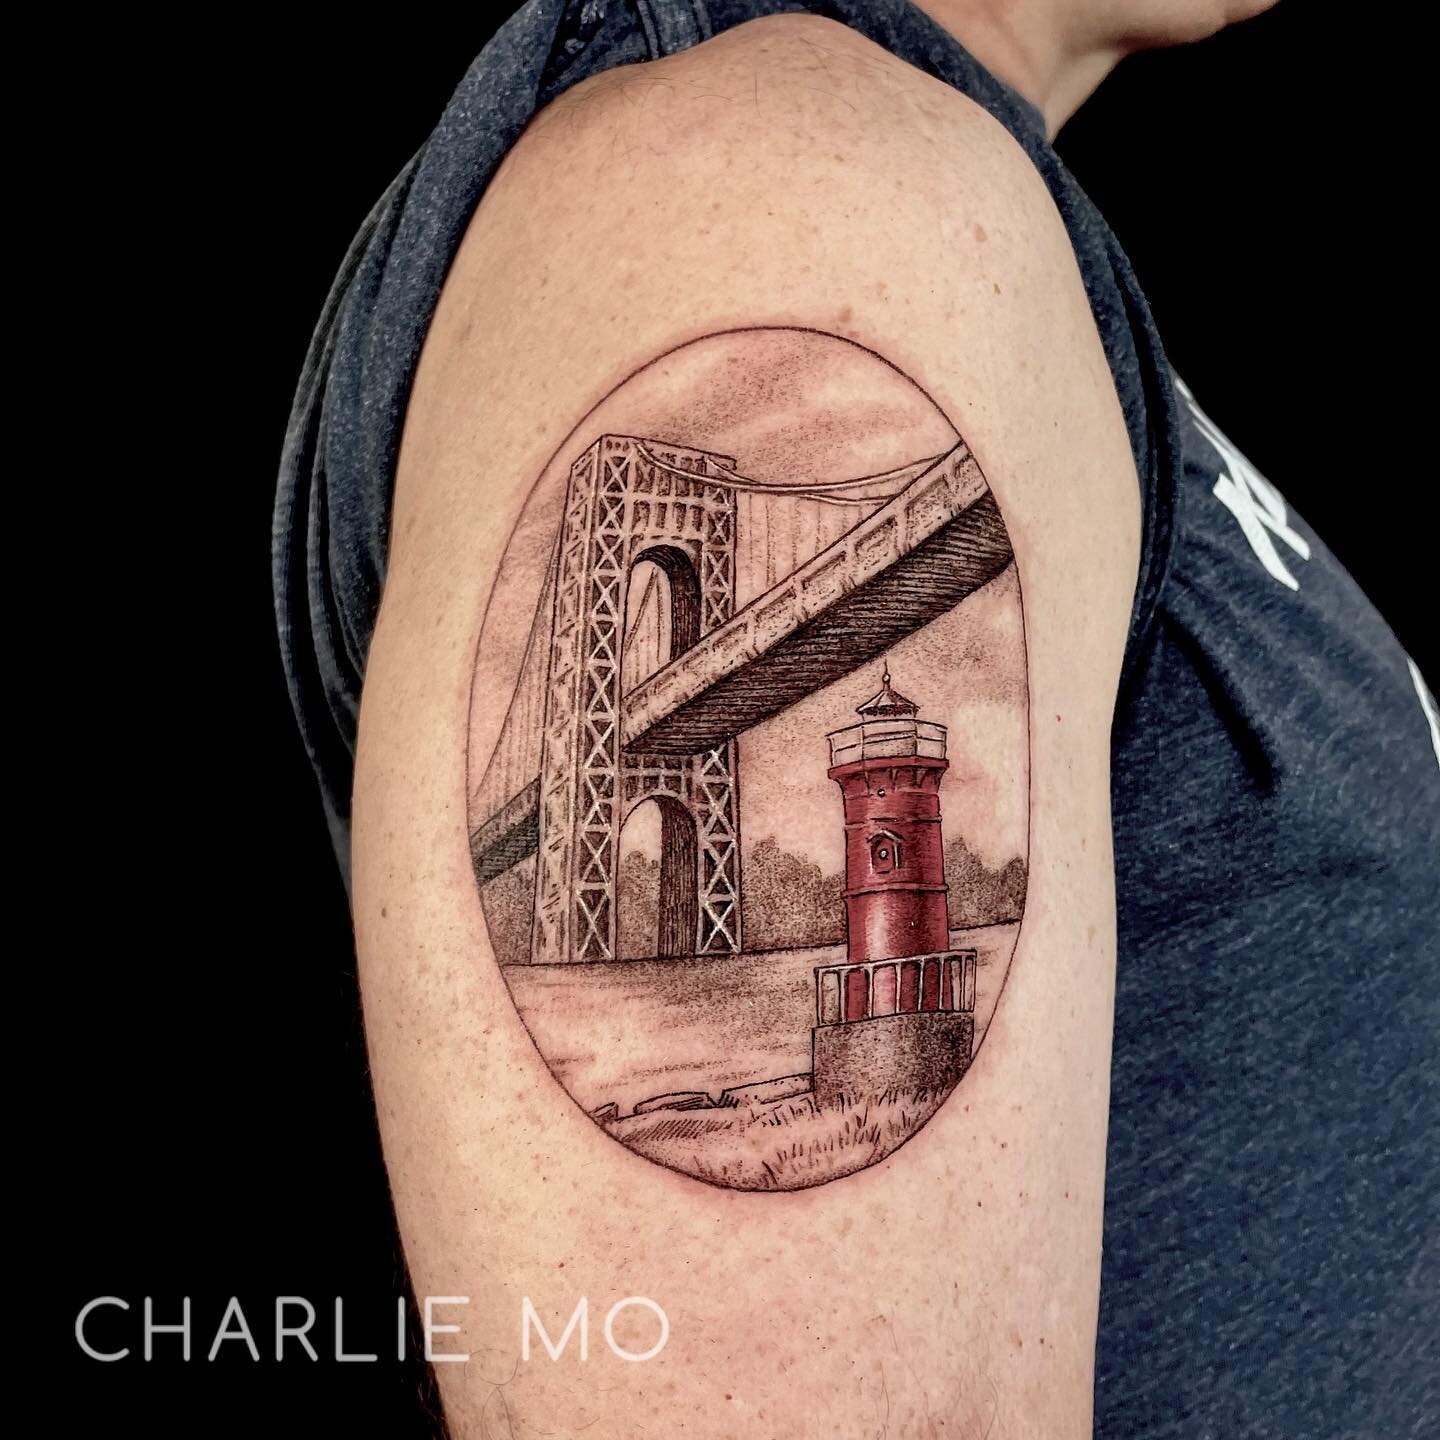 George Washington bridge and the red light house in New York for Rich! Thank you so much for your trust~ 

#finelinetattoo #blackandgreytattoo #landscapetattoo #newyorkcity #georgewashingtonbridge #bayareatattoo #bayareatattooartist